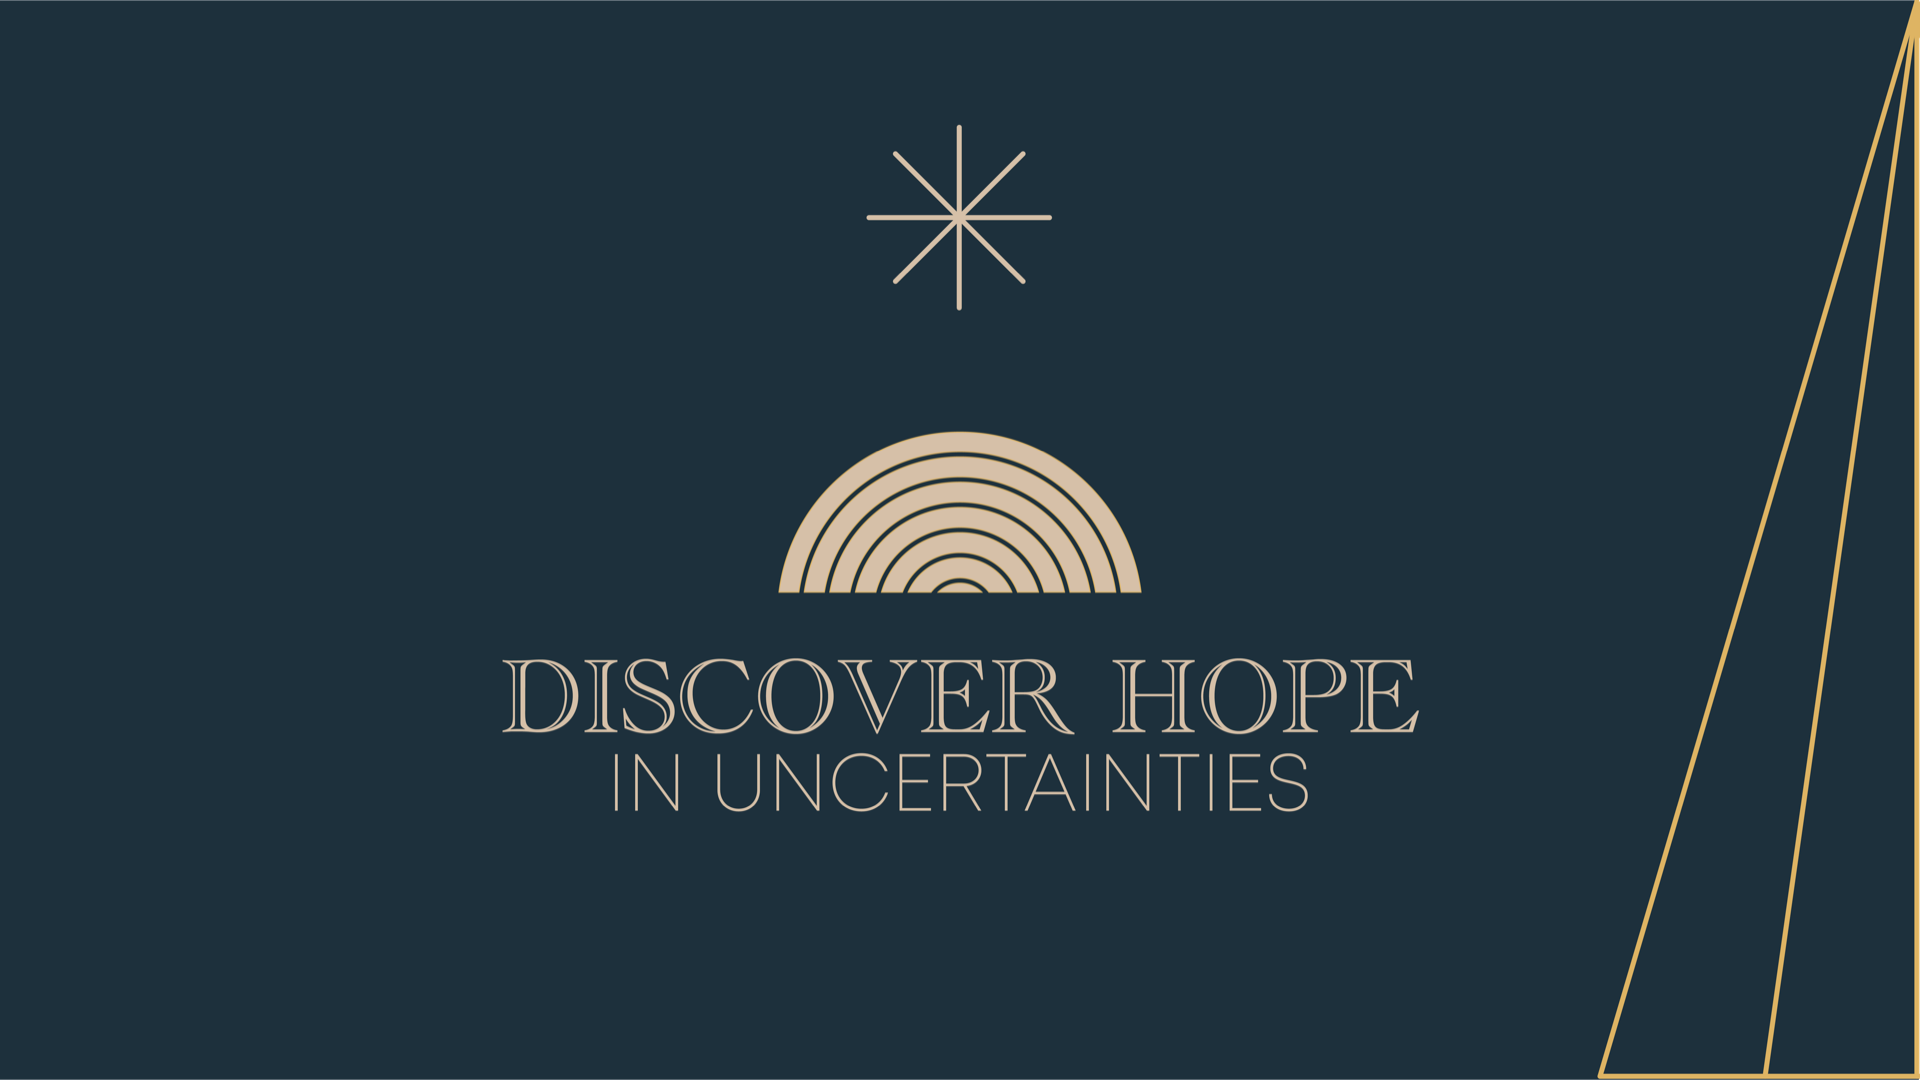 Discover Hope in Uncertainty